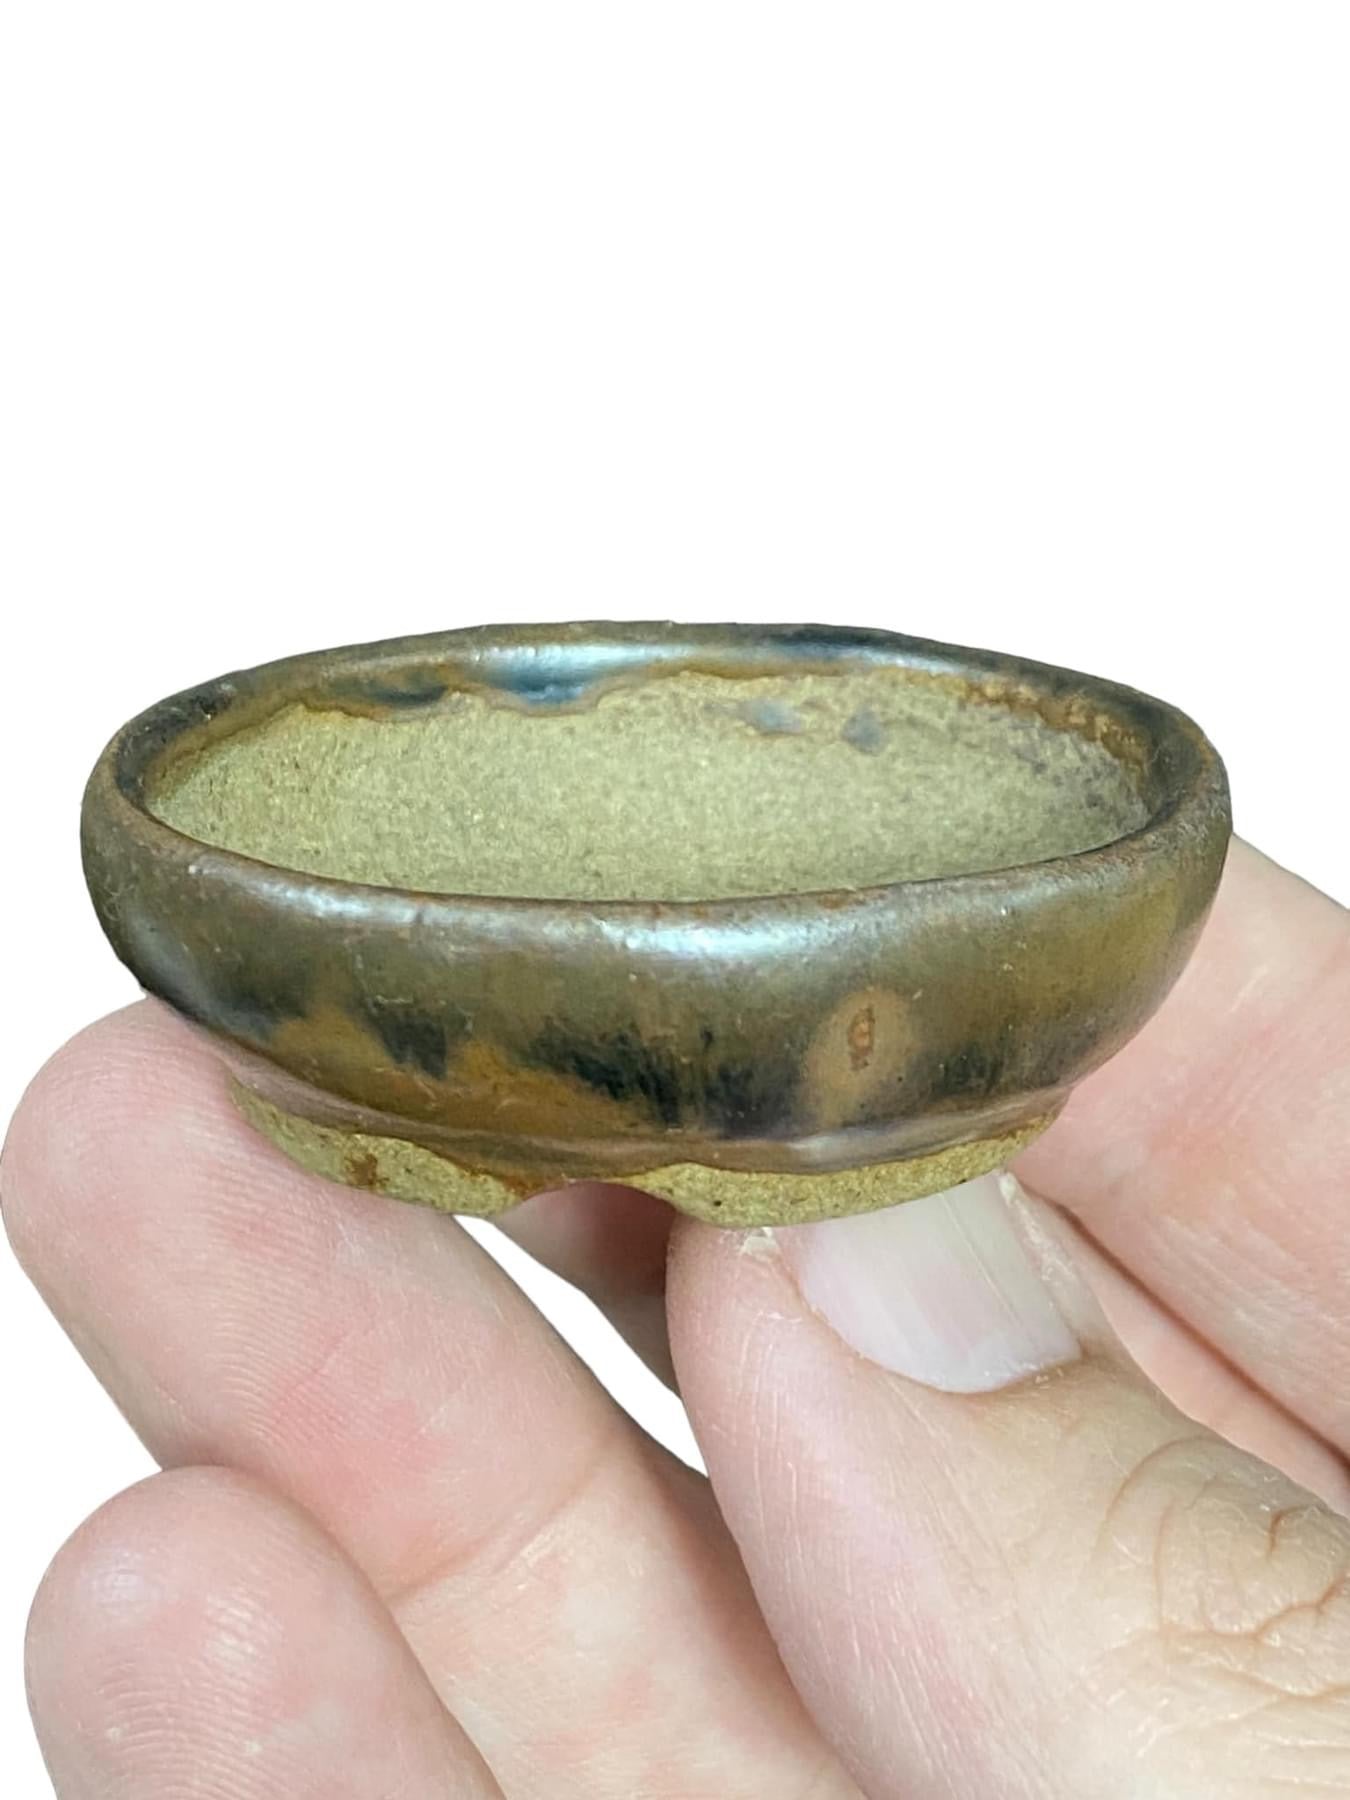 Japanese - High Quality Glazed Mame Pot from Japan